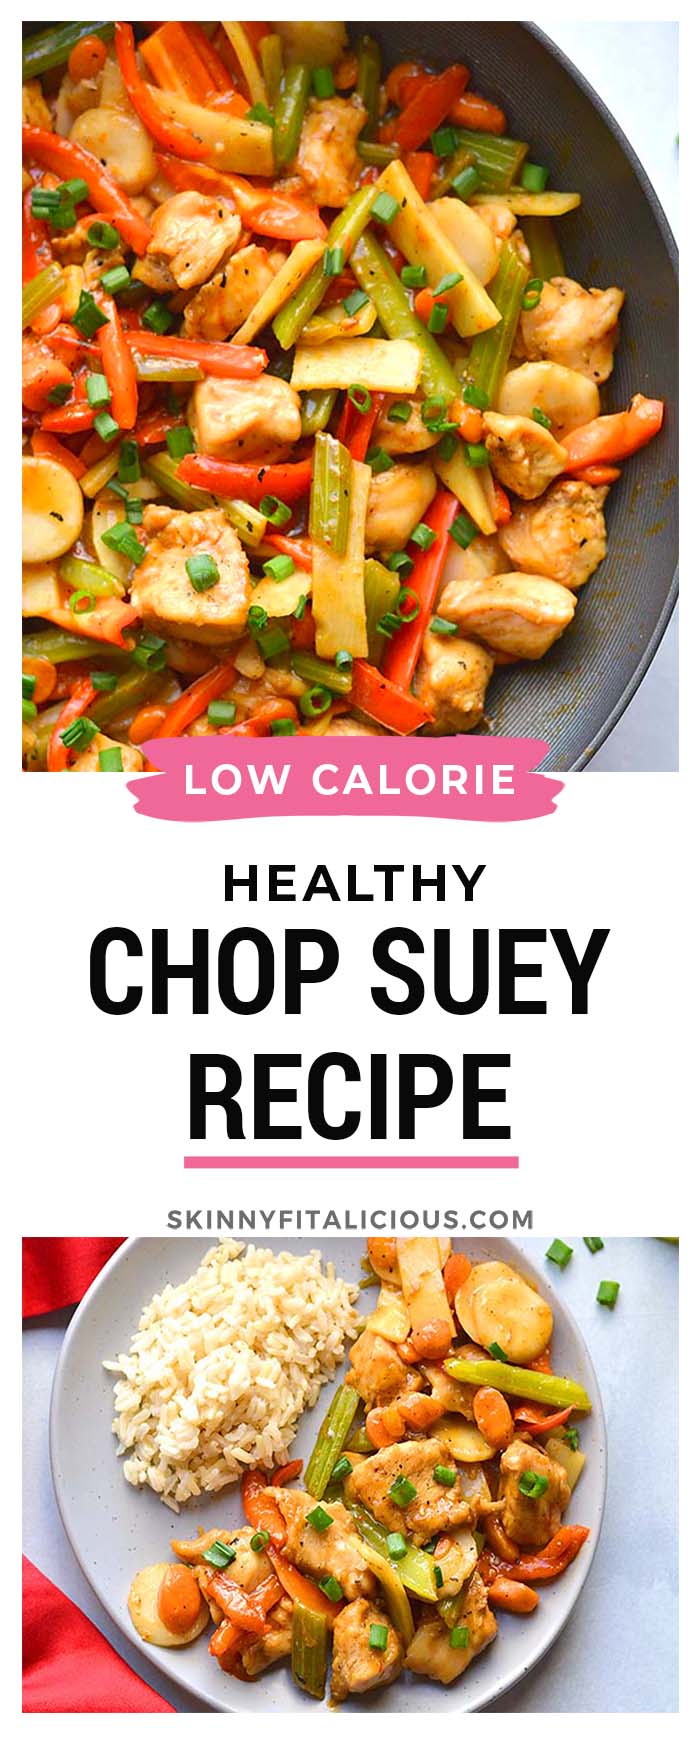 This Healthy Chop Suey recipe is a low calorie meal that's lighter than traditional Asian chop suey recipes and it's made gluten free! An easy and filling recipe!